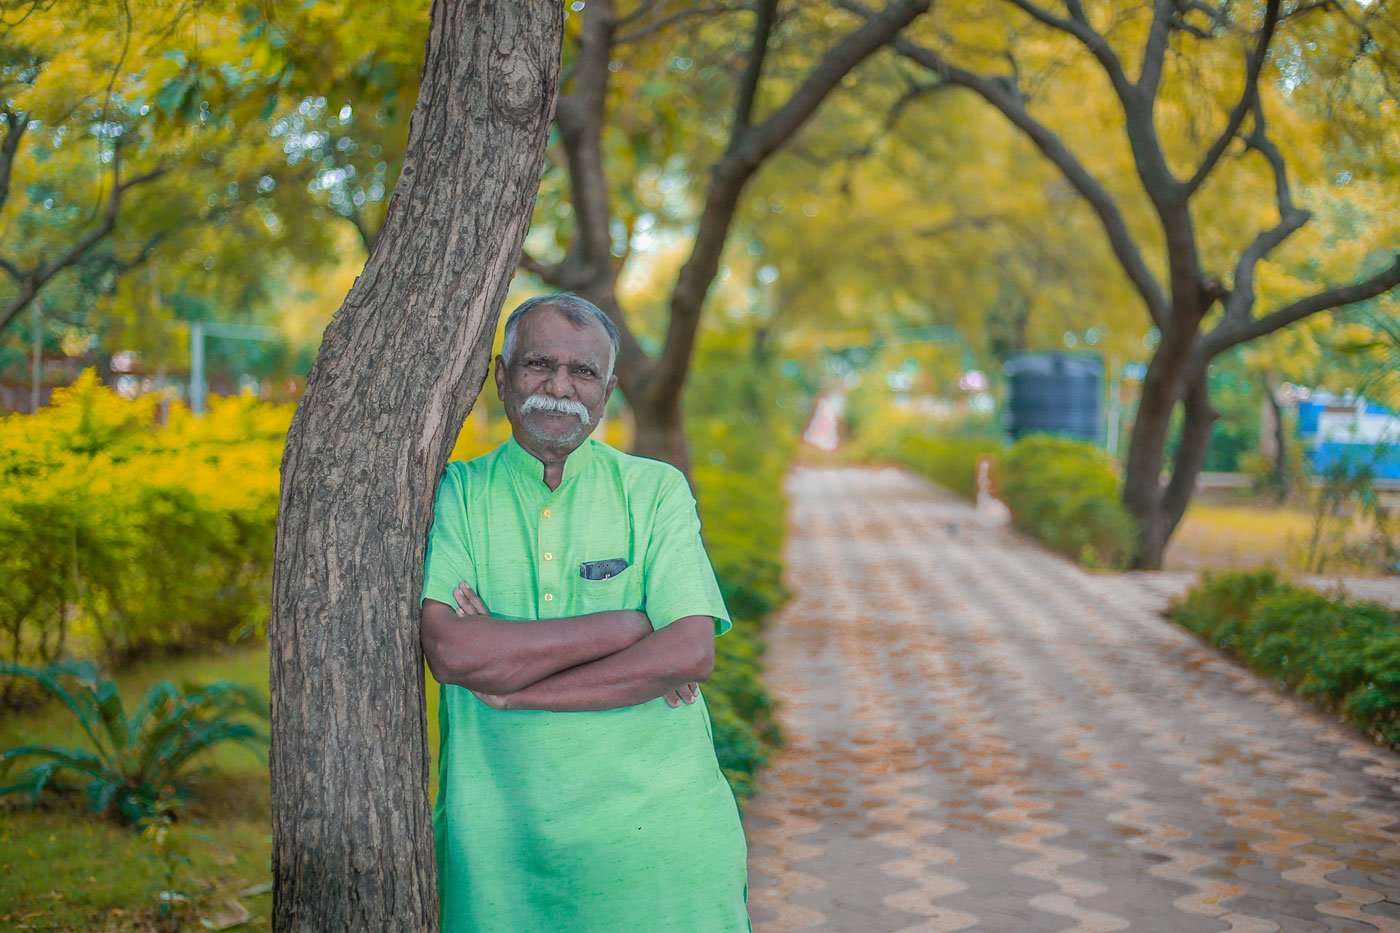 From Tamil writer Cho Dharman, an invaluable oral history of how villages over centuries engaged with viruses, plagues and epidemics – relating that to the current Covid-19 pandemic and life under lockdown